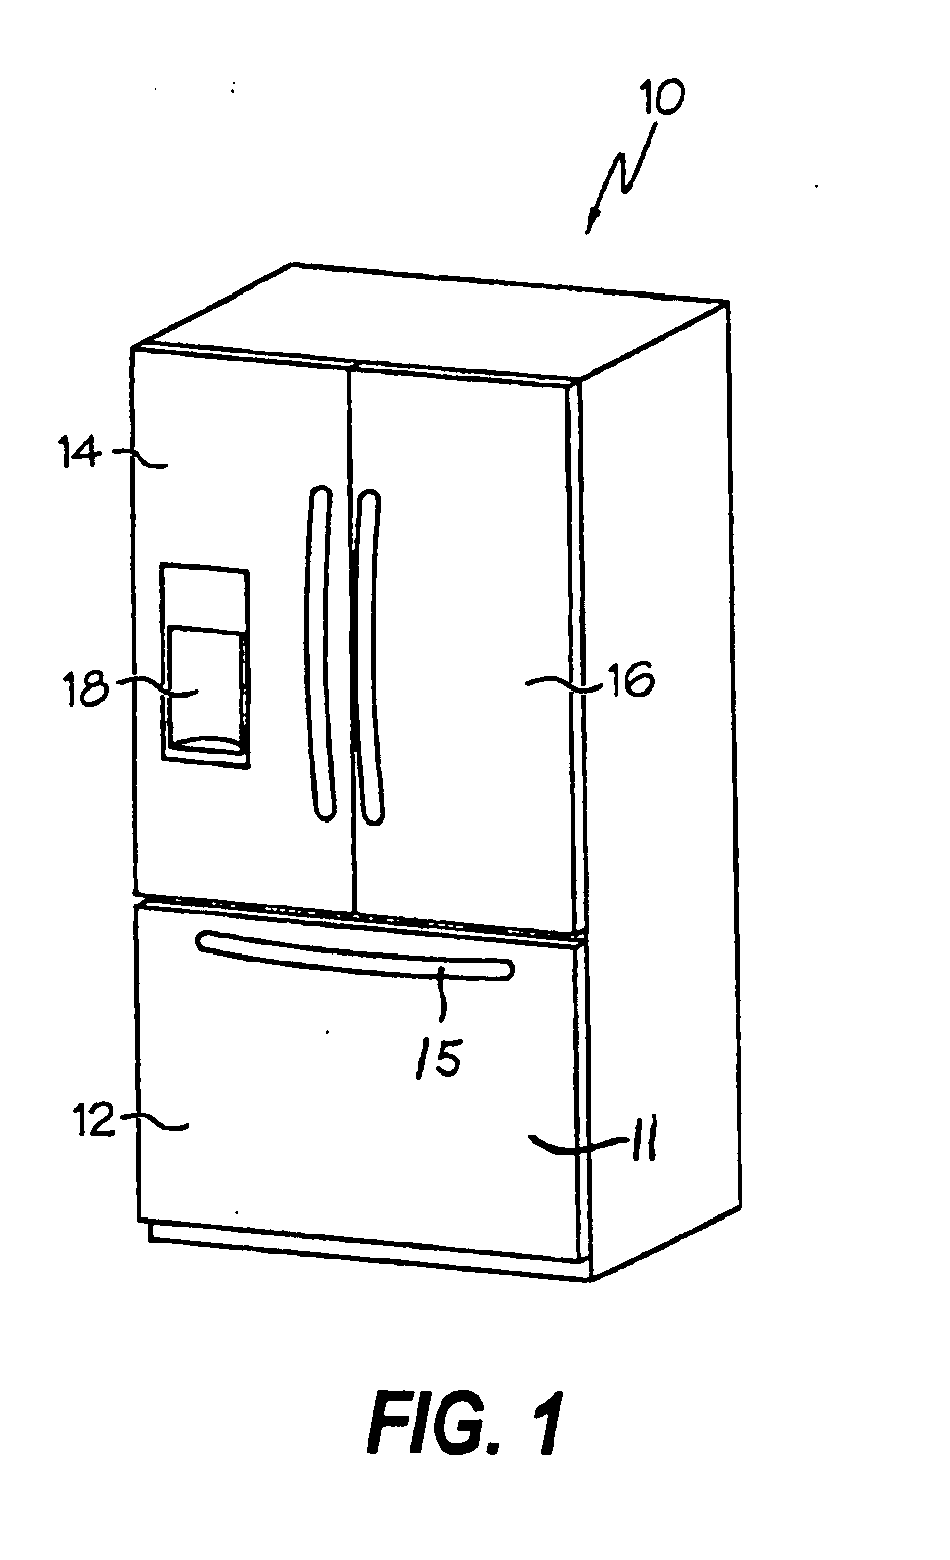 Refrigeration apparatus for refrigeration appliance and method of minimizing frost accumulation